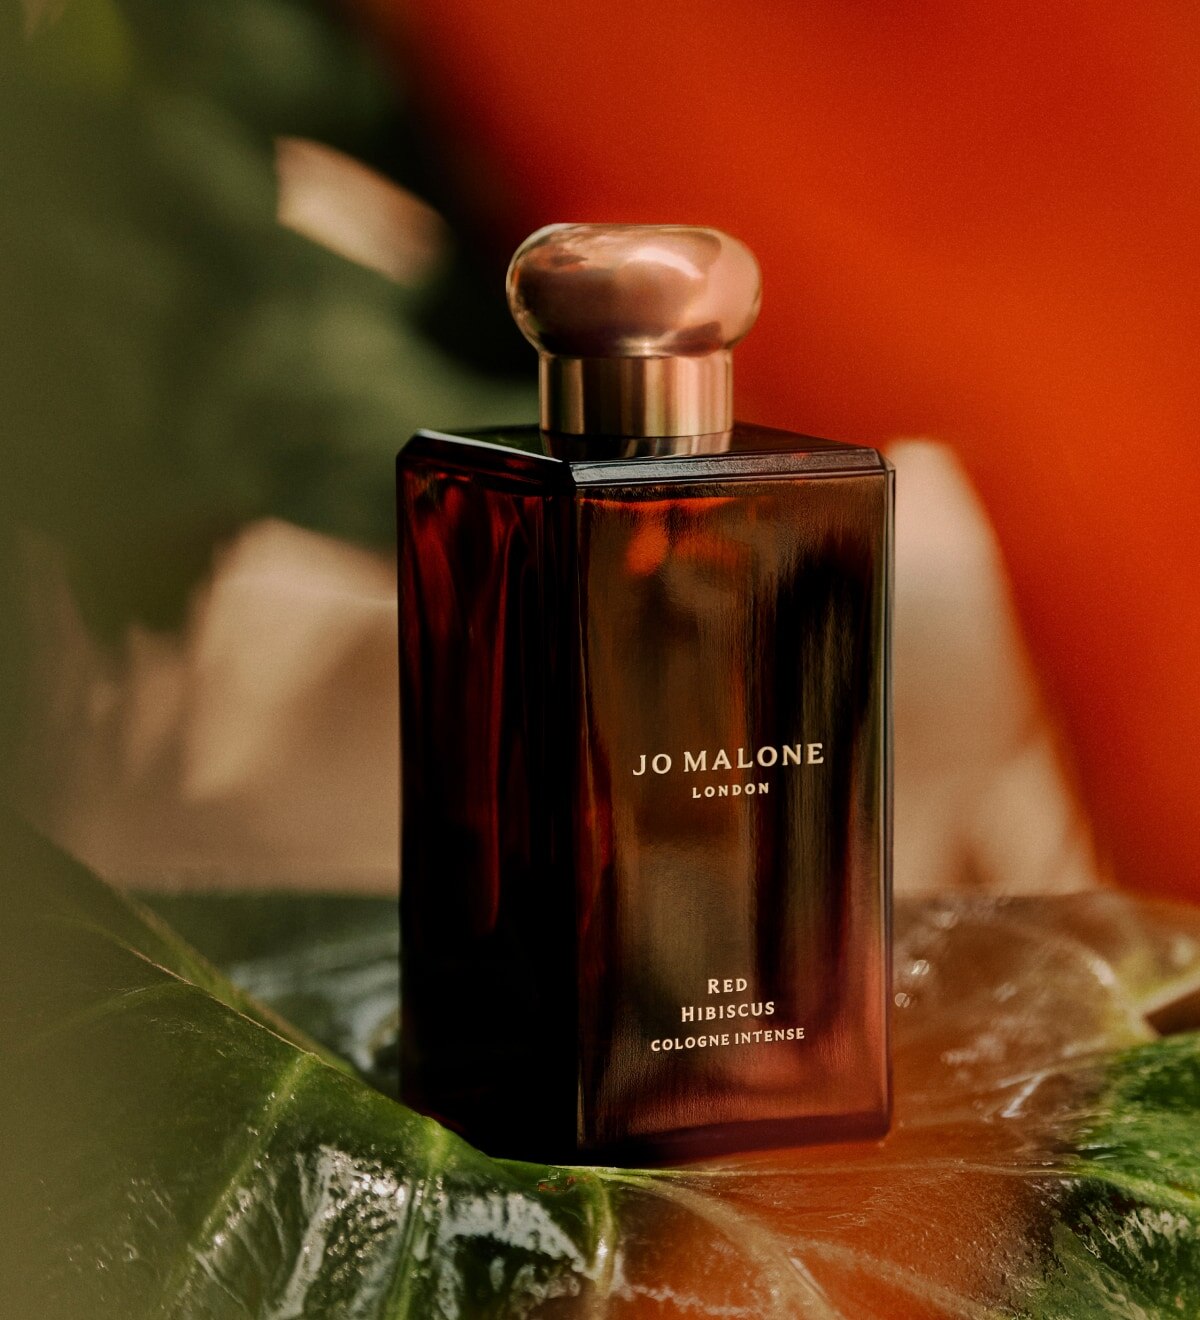 Jo Malone London Red Hibiscus 100ml Cologne surrounded by red hibiscus flowers & green leaves